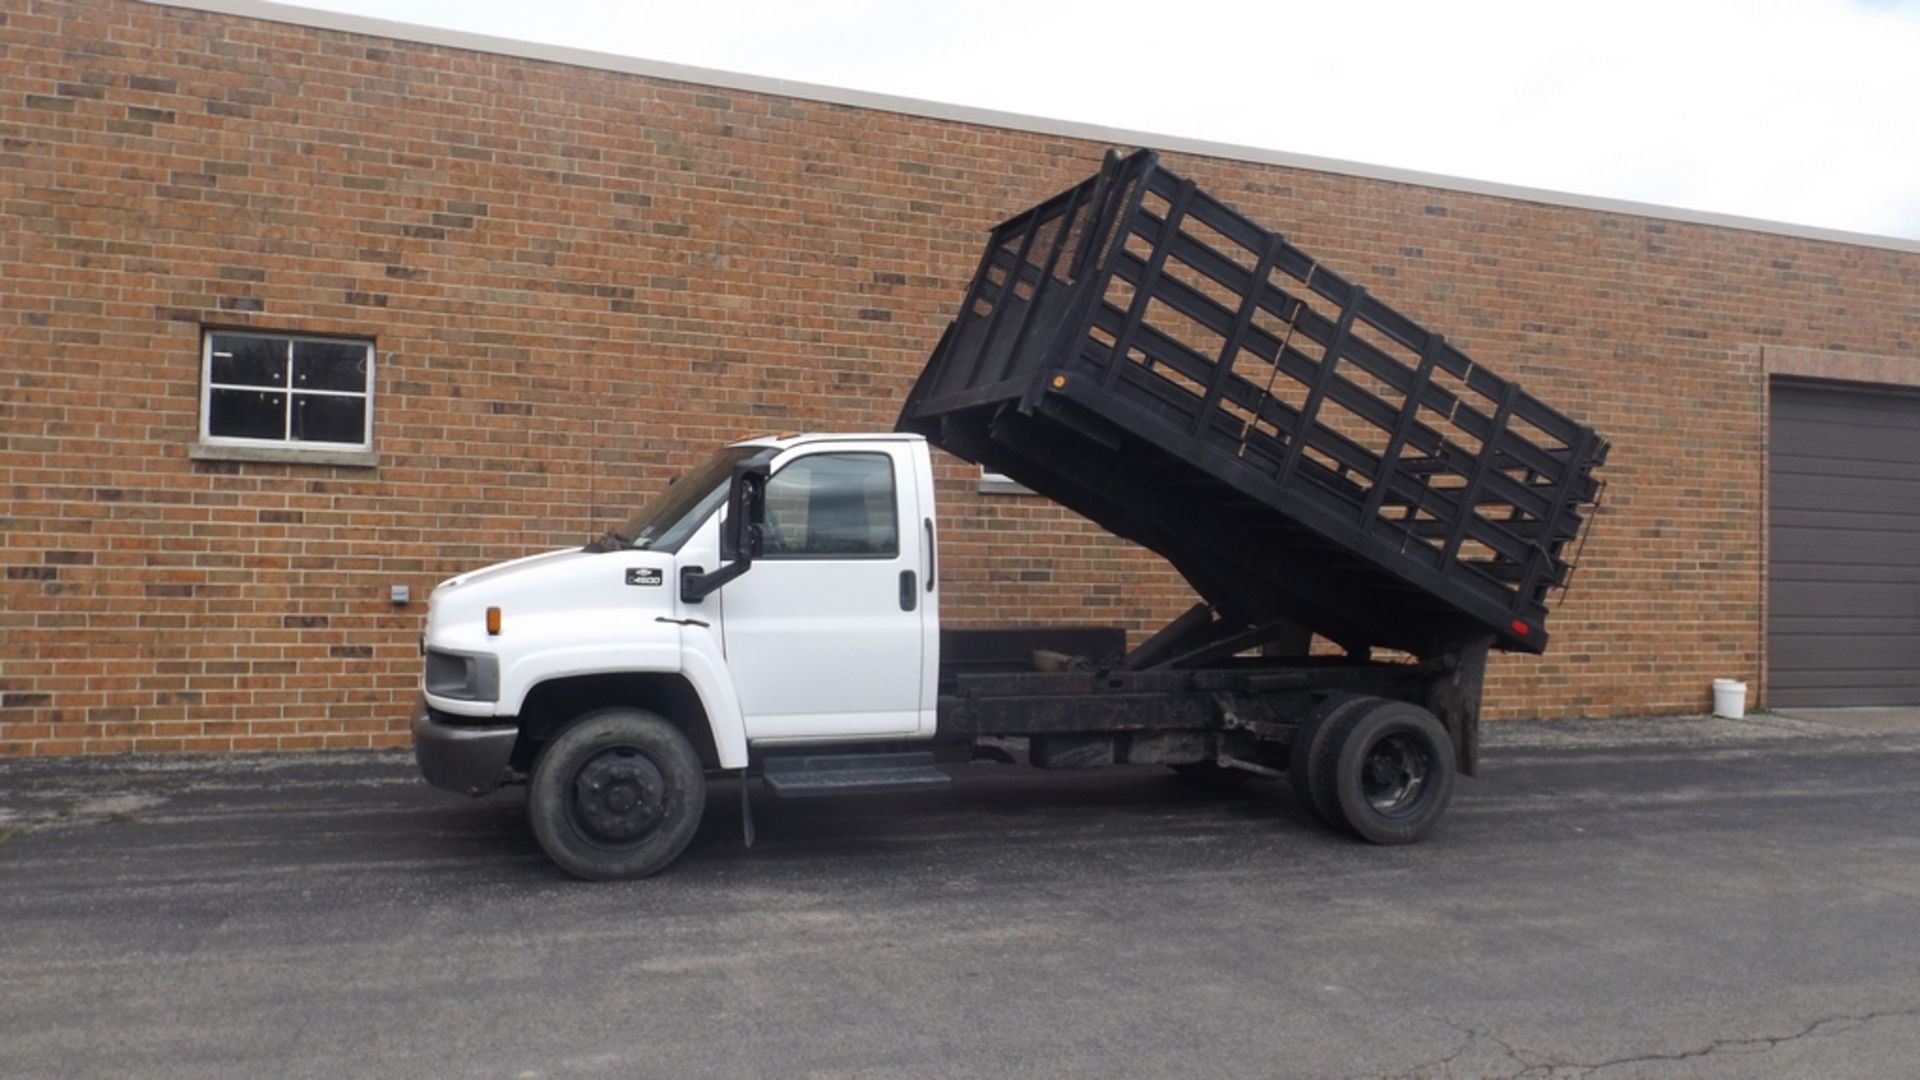 CHEVROLET C4500 12' S/A STAKE SIDE FLAT BED TRUCK VIN: 1GBE4C1E45F501990 (2005) 8 CYL., A/T, 15' - Image 3 of 7